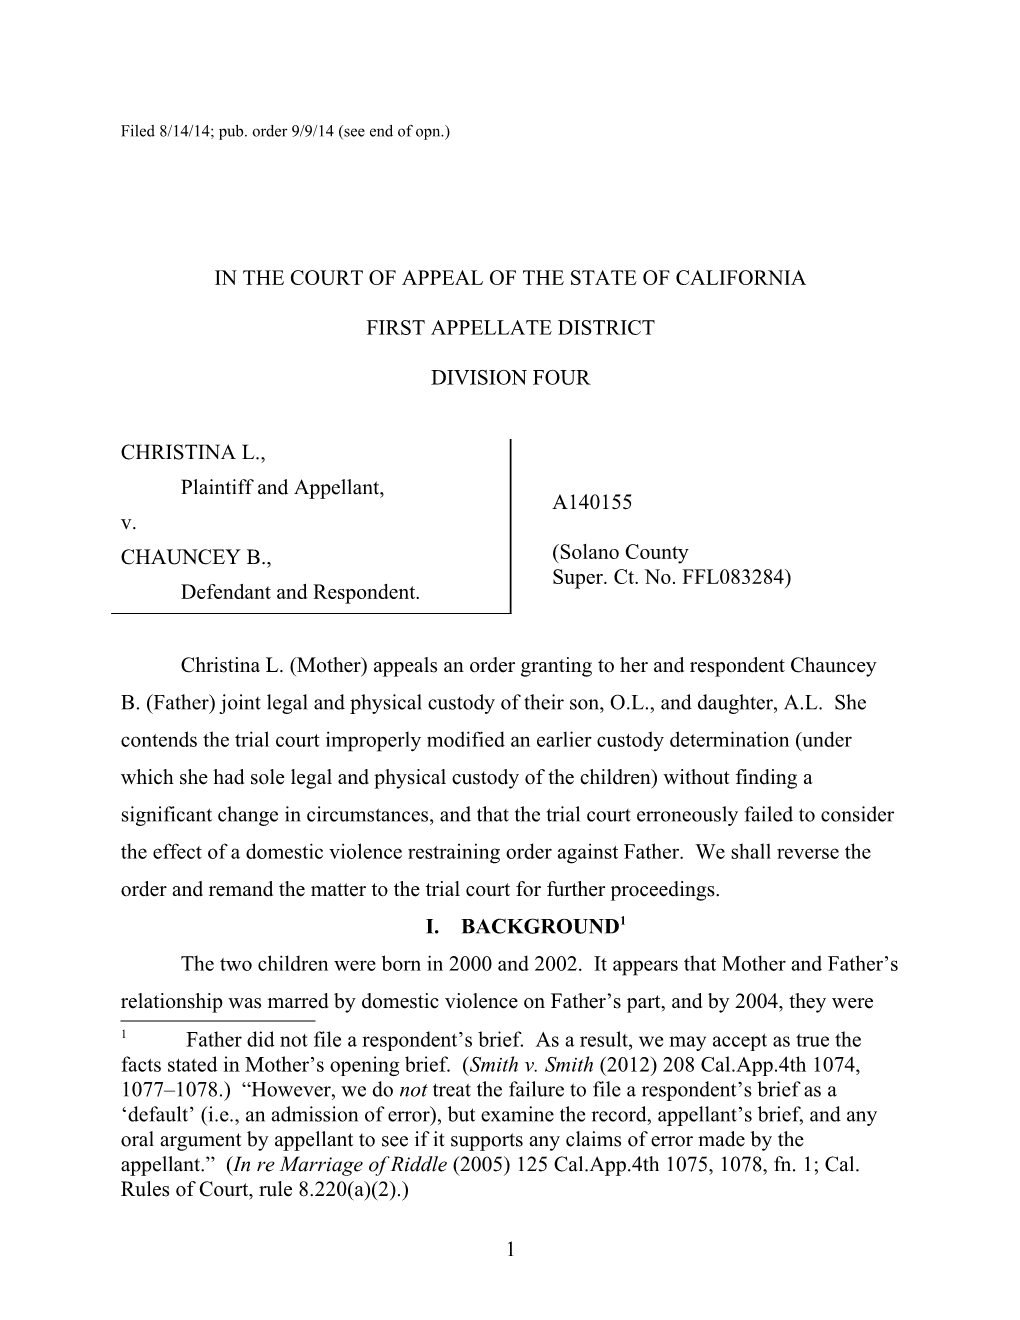 Filed 8/14/14; Pub. Order 9/9/14 (See End of Opn.)